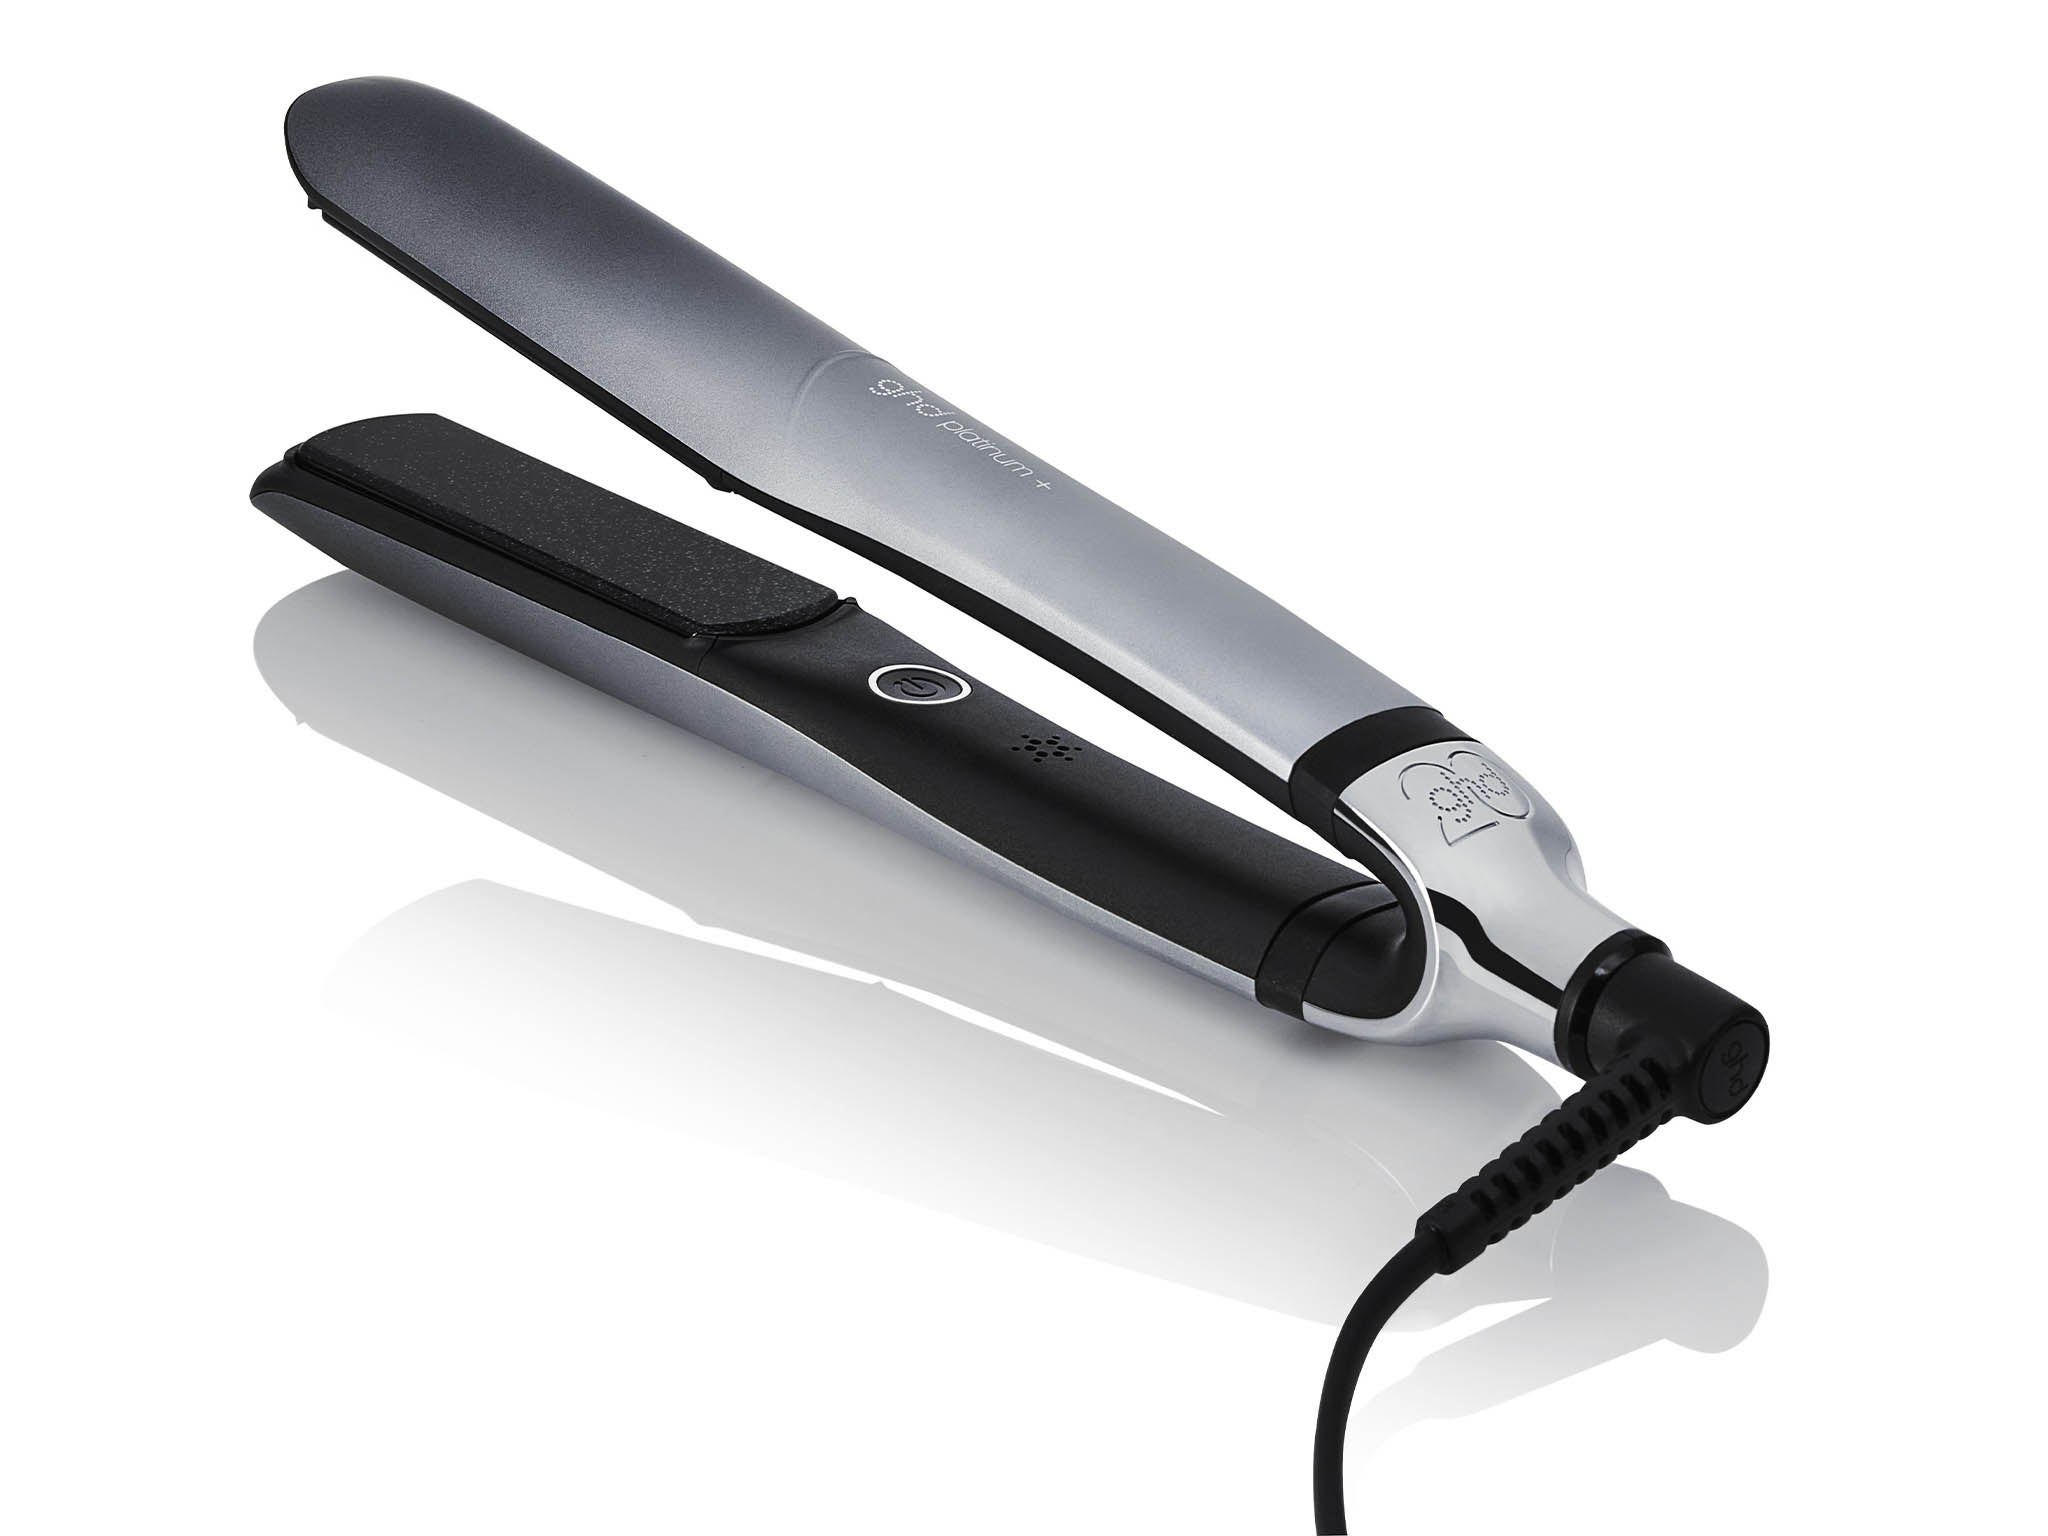 Ghd platinum plus review: We put the smart straightener to the test